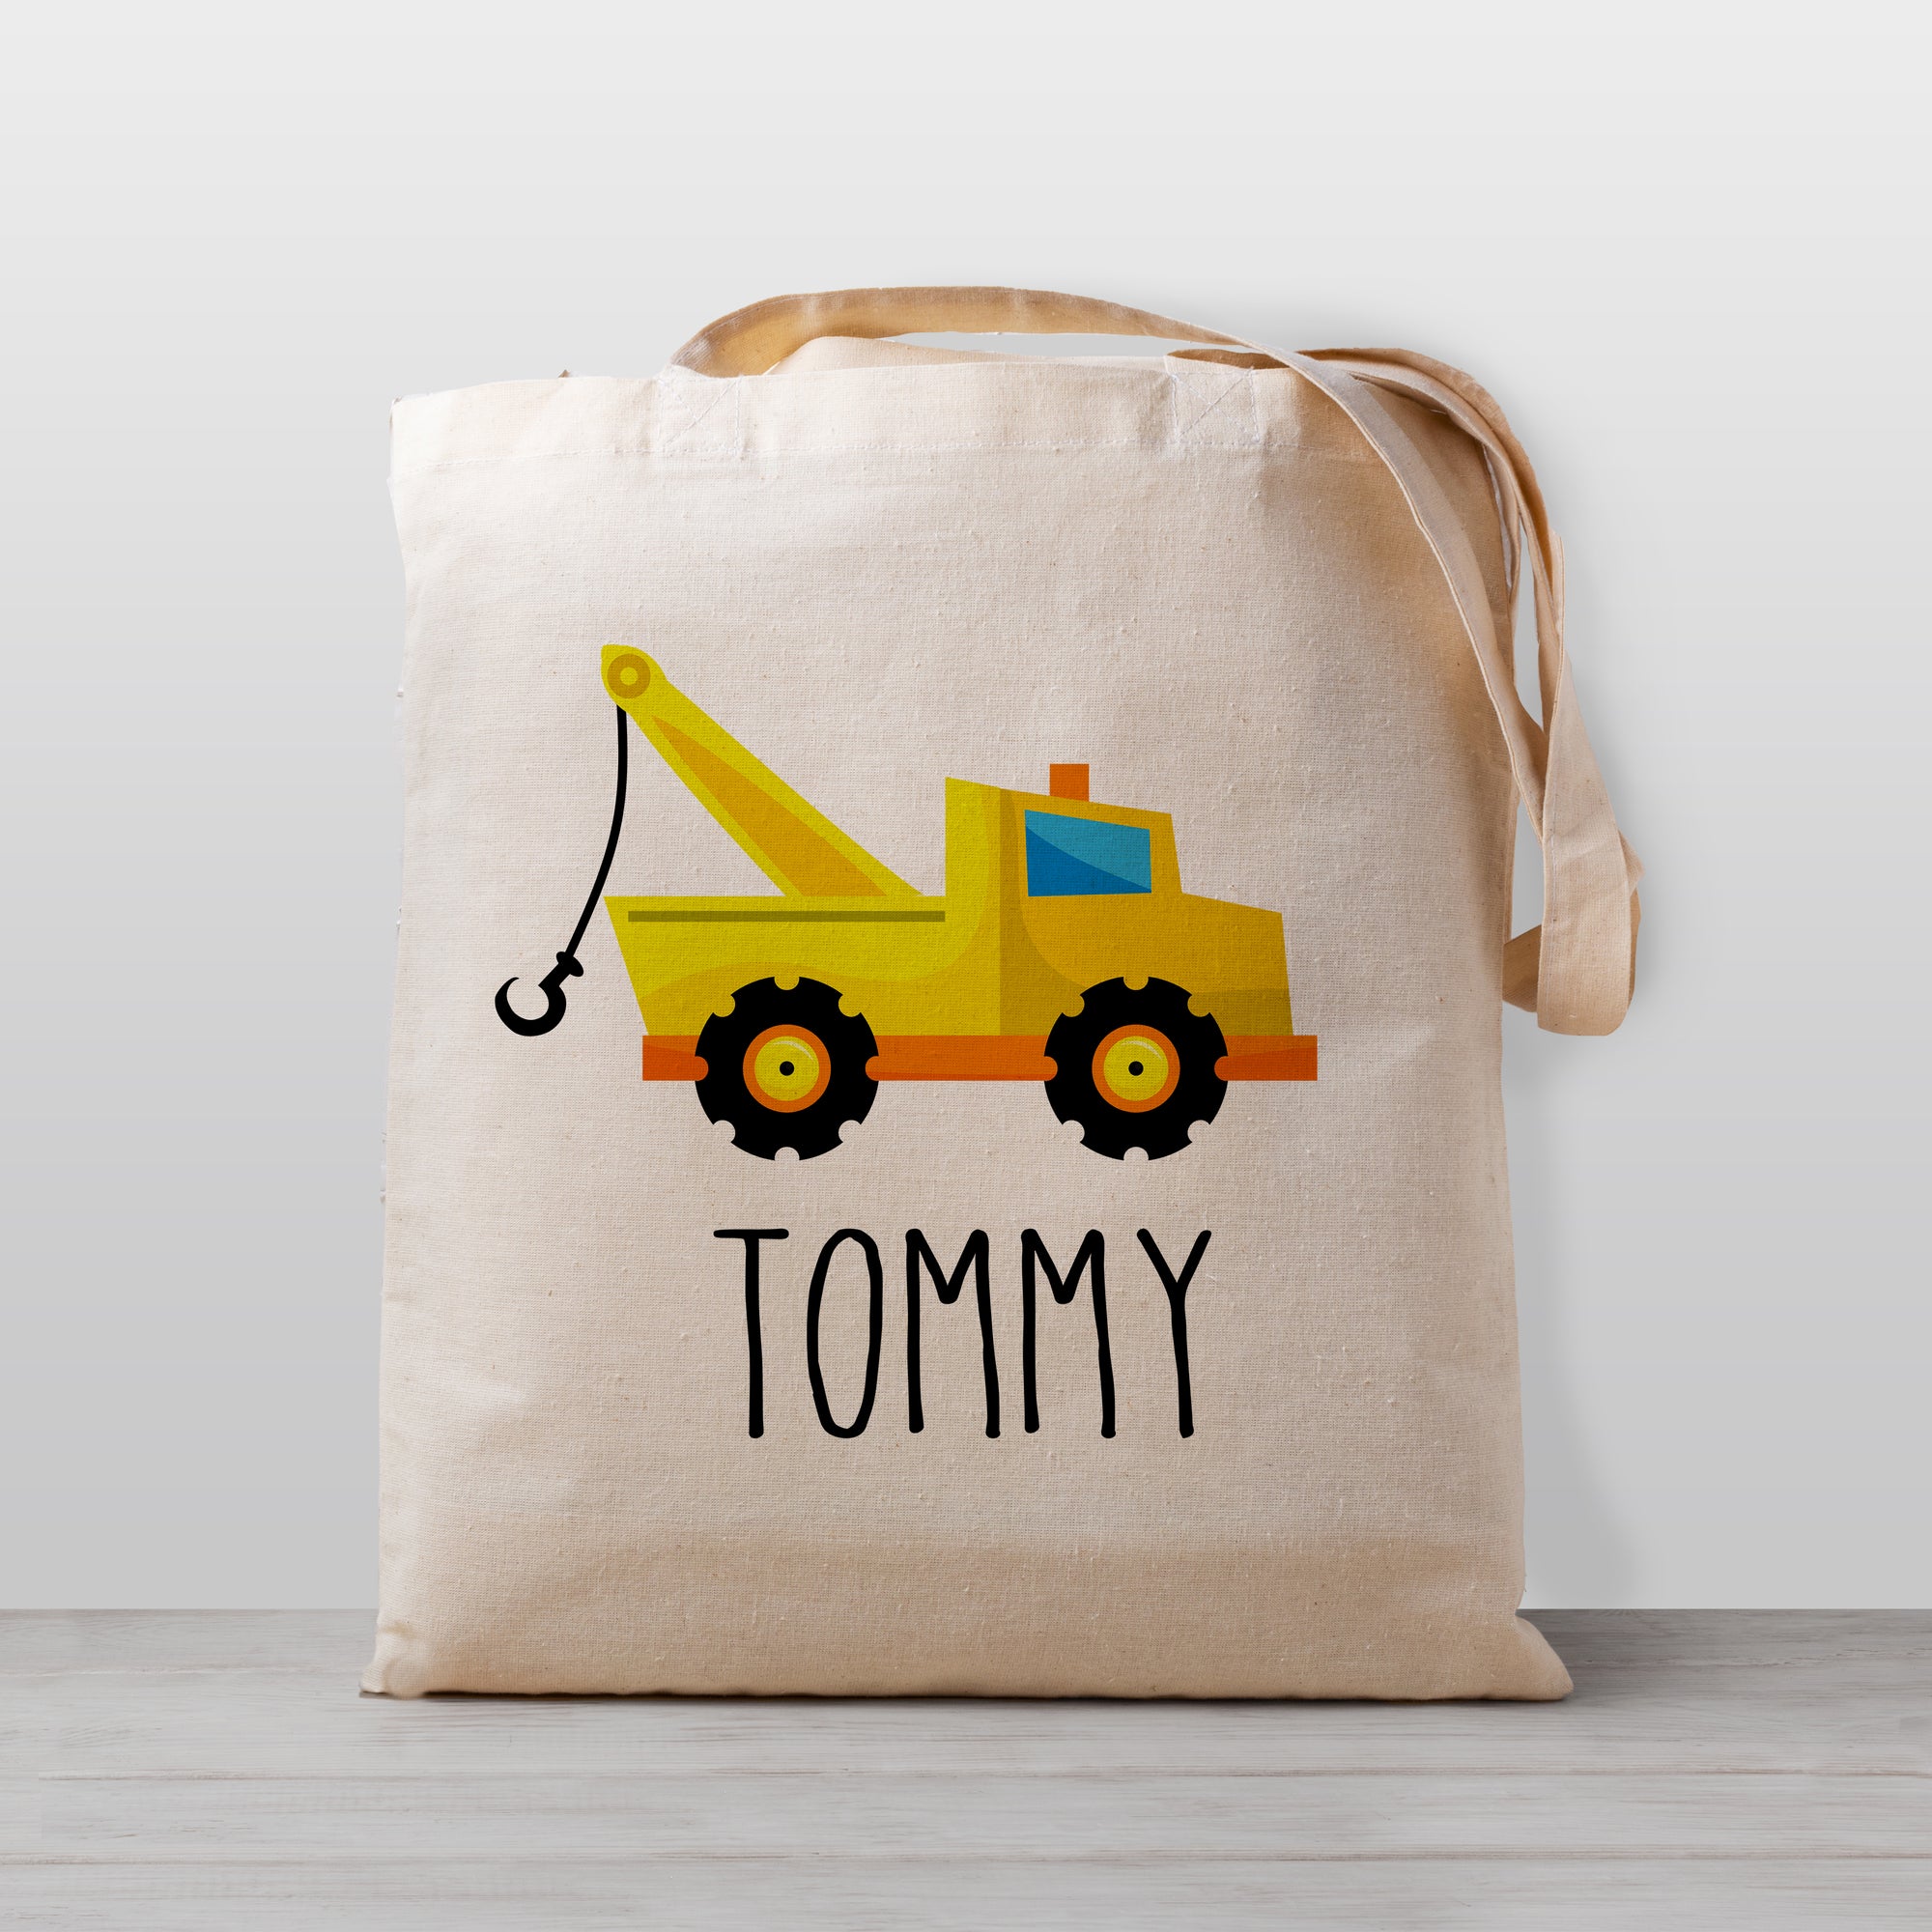 A tow truck personalized tote bag, perfect for carrying your little one's stuff to preschool or kindergarten. Works great as a library book bag or to haul toys, too! 